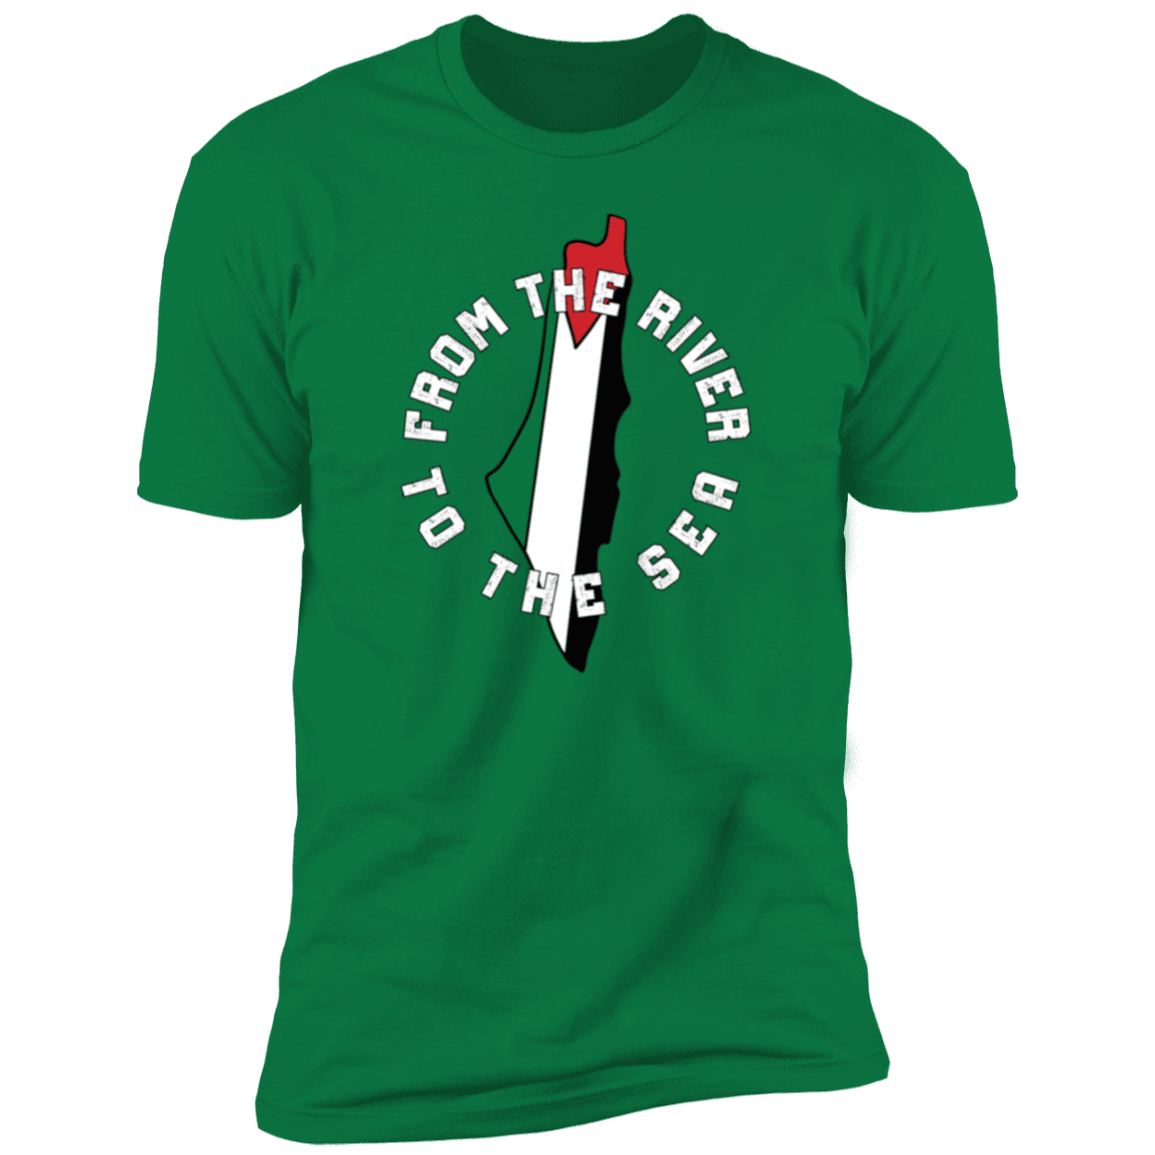 From the River to the Sea Palestinian Support T-shirt - SunnahBay